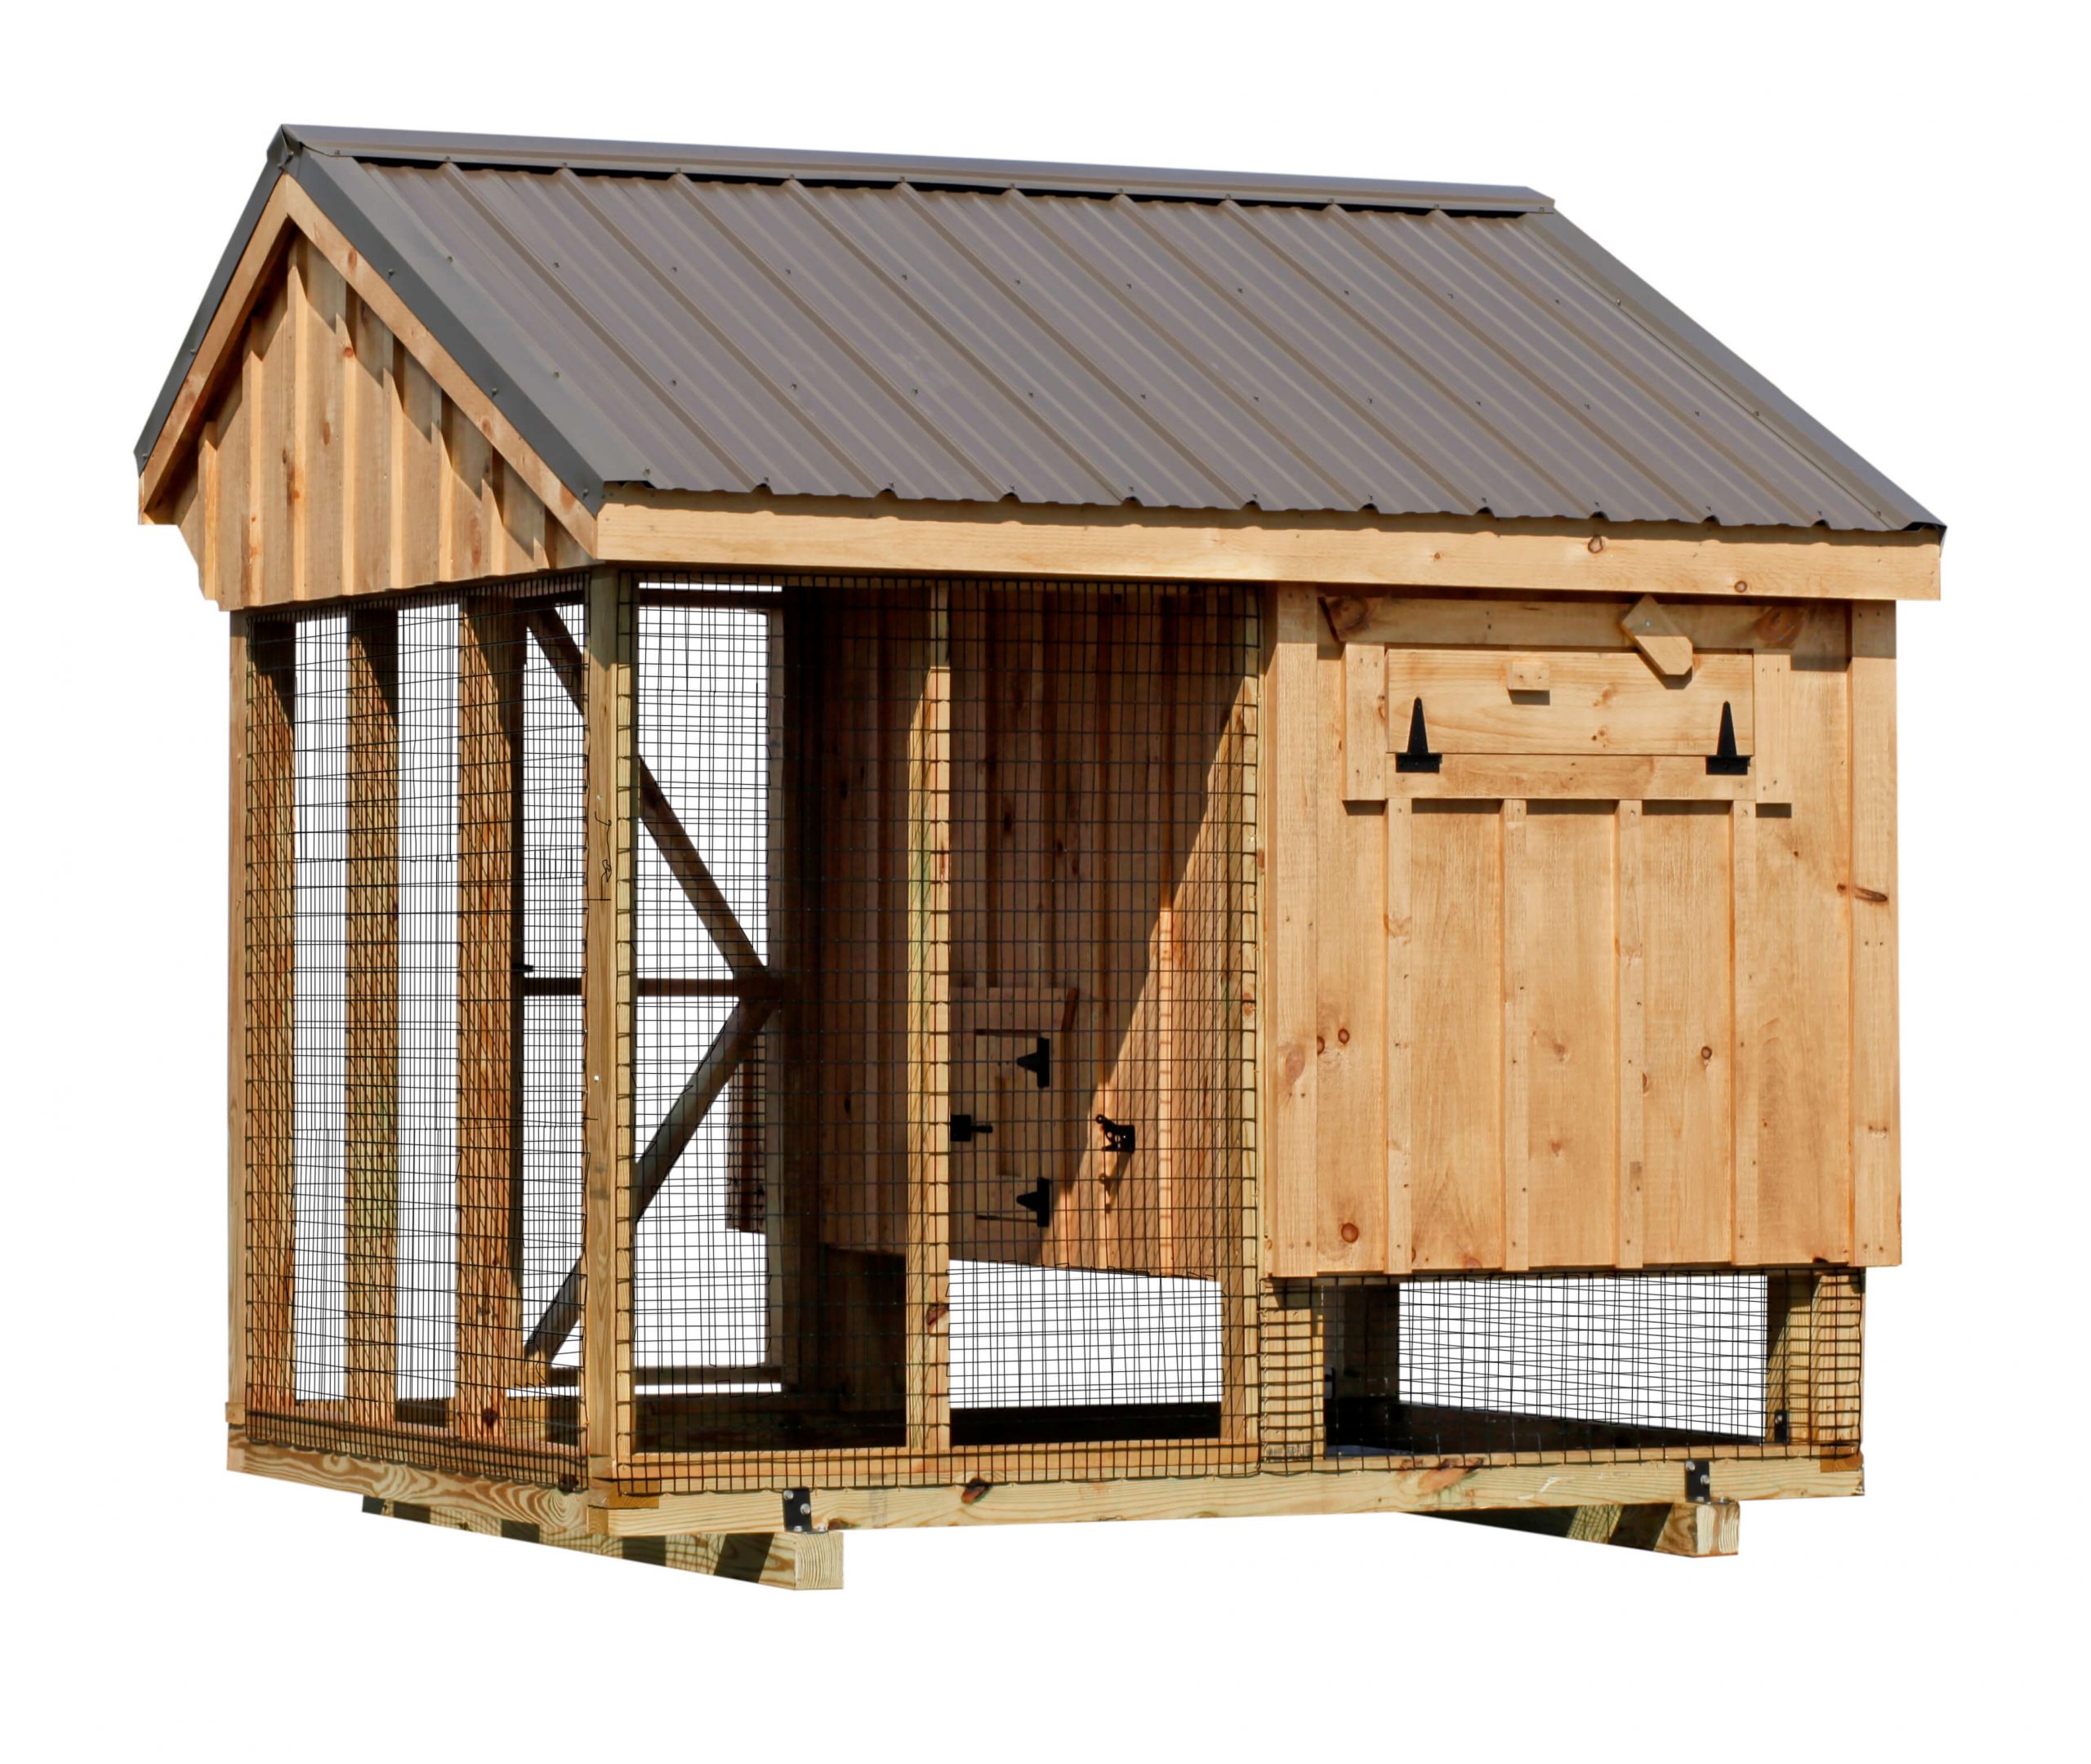 Exterior of a 6x8 Quaker Combination chicken coop